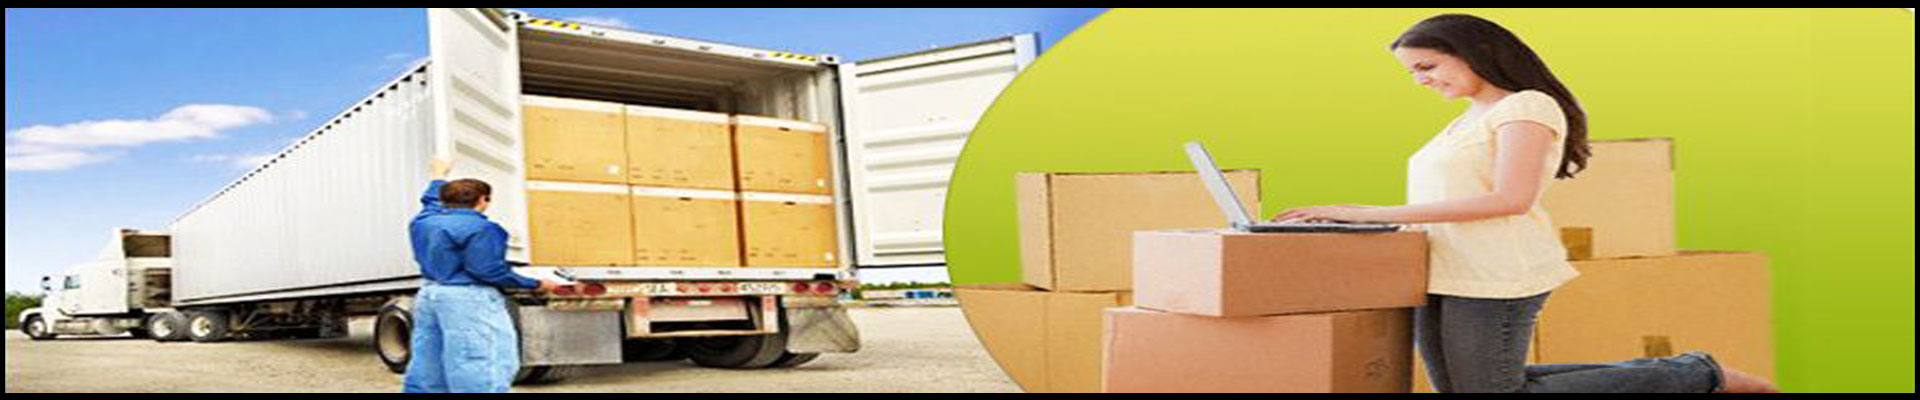 Noida Packers And Movers Sector 2